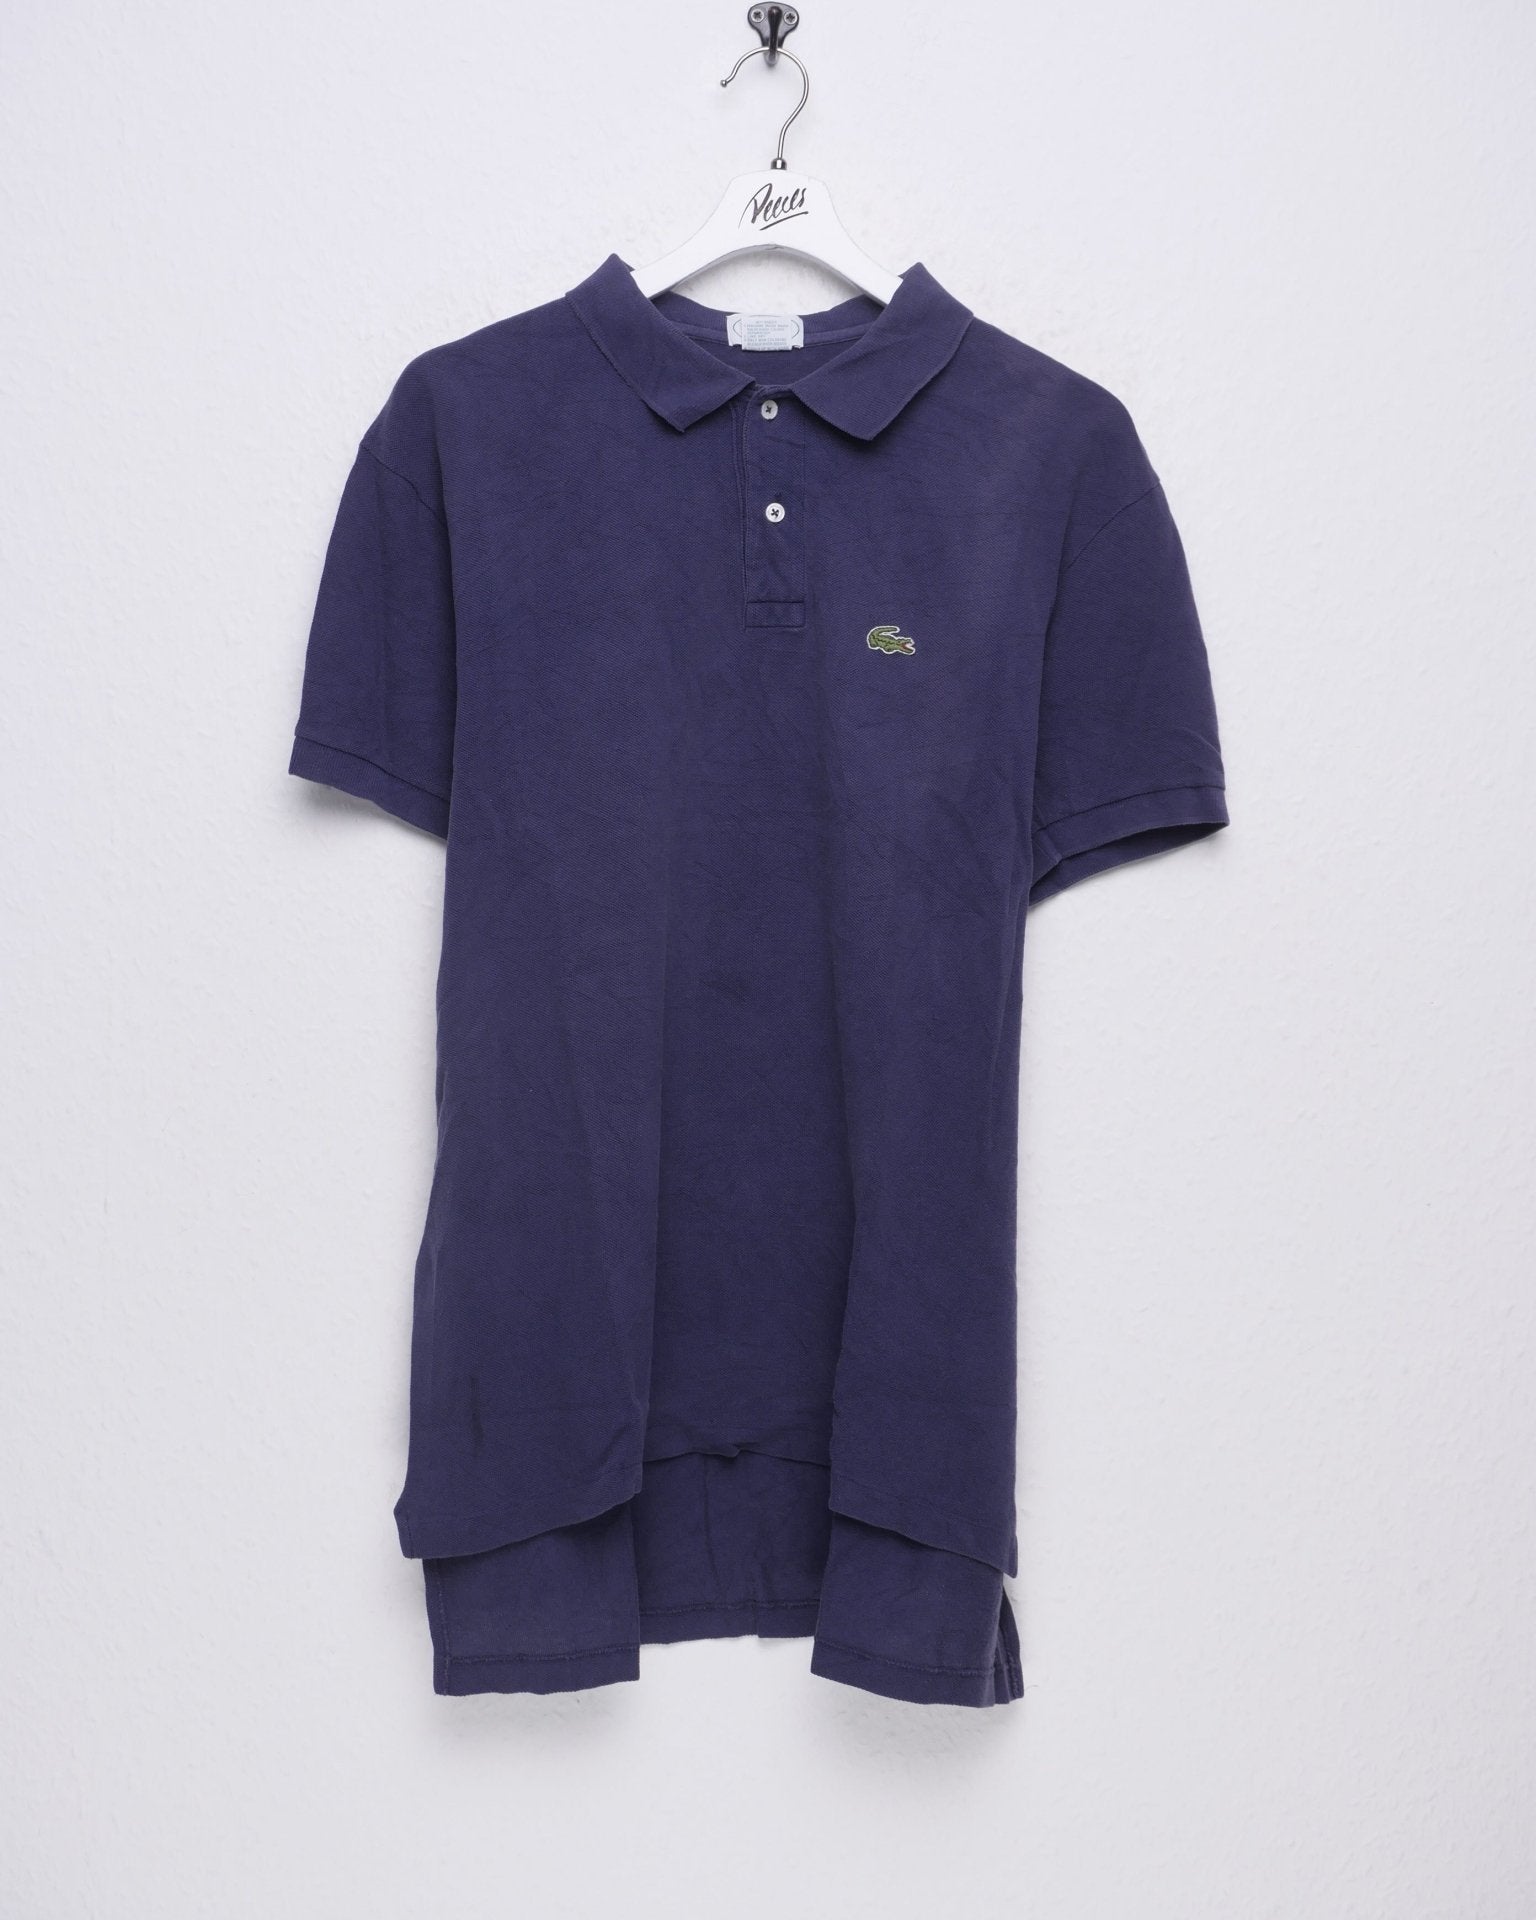 Lacoste patched Logo Vintage Polo Shirt - Peeces